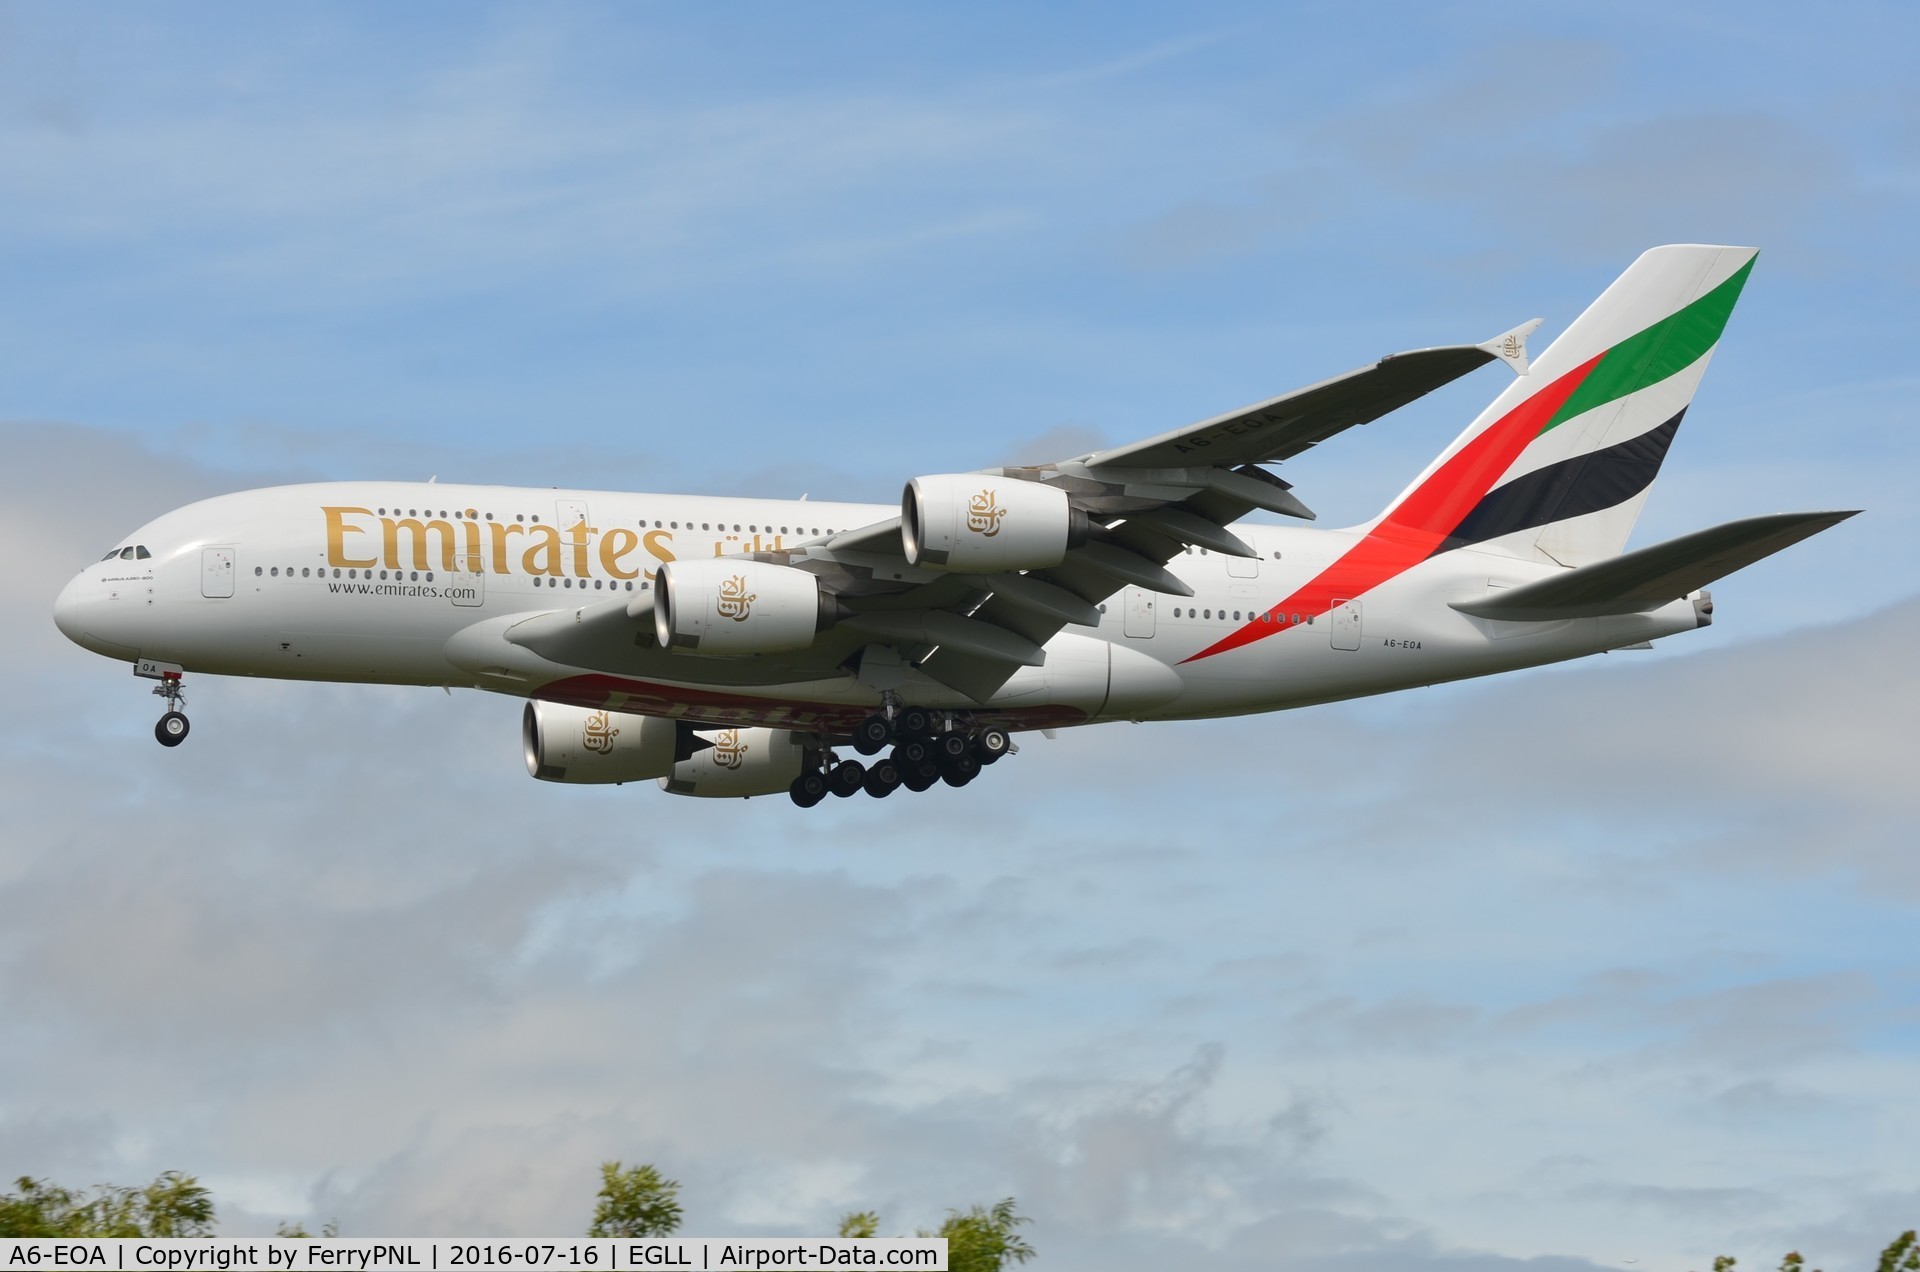 A6-EOA, 2014 Airbus A380-861 C/N 159, Emirates A388 arriving in London